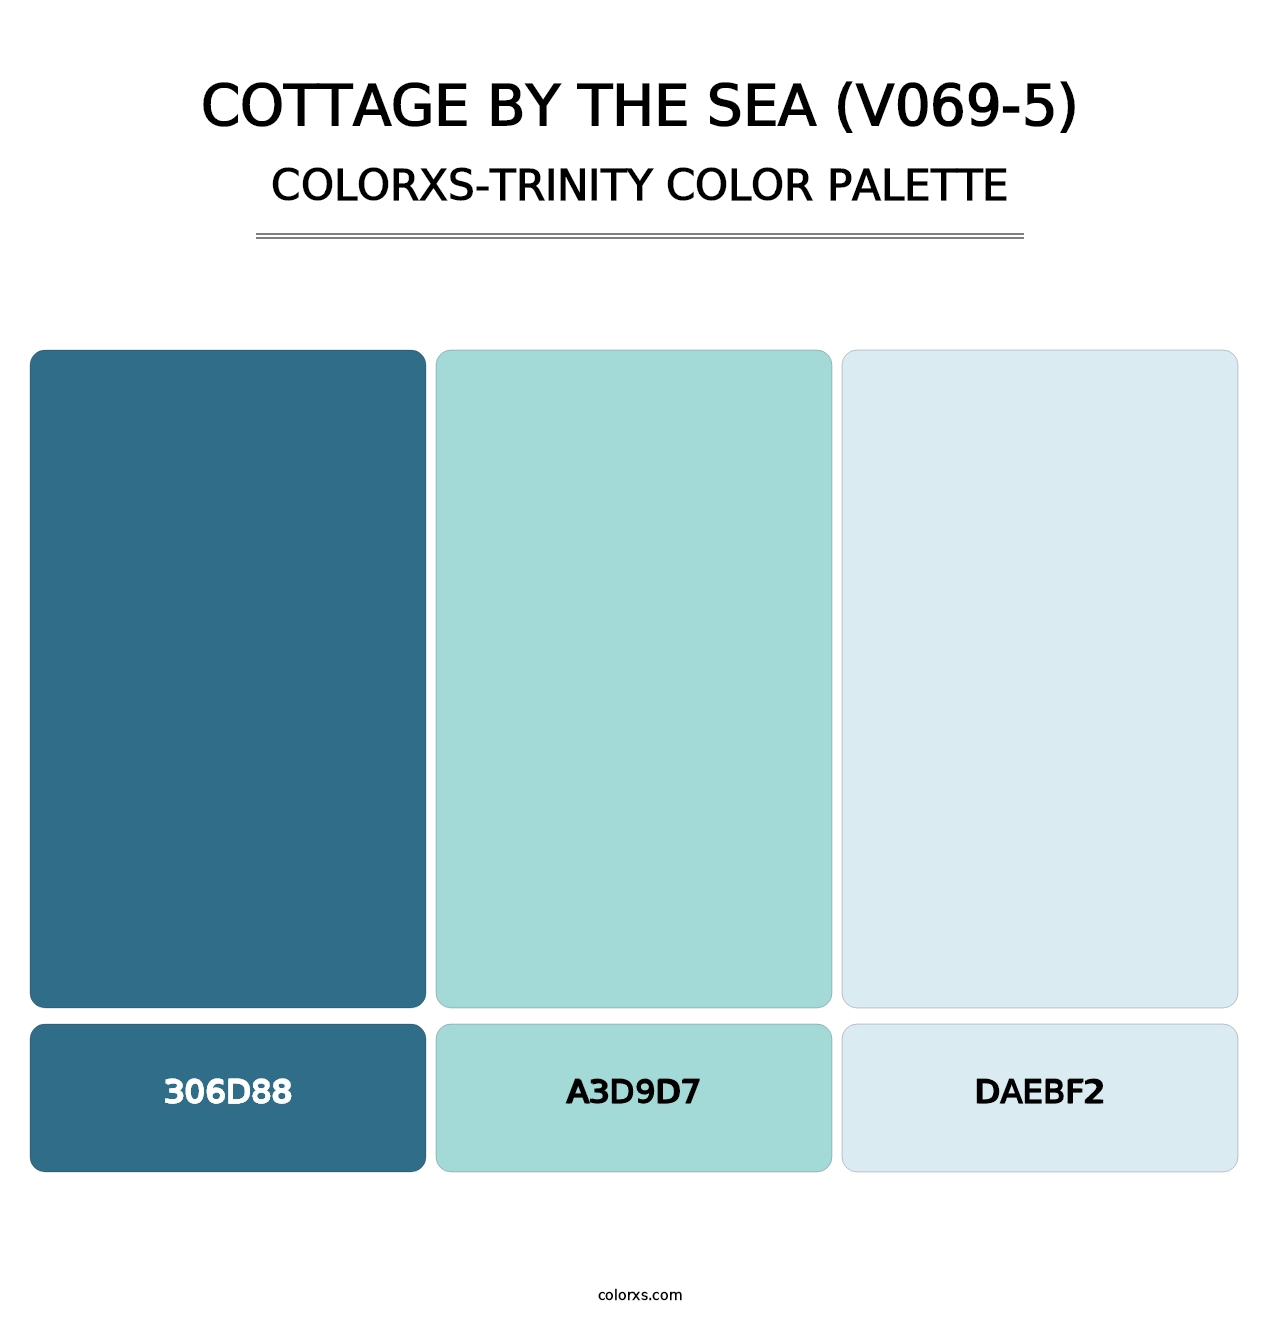 Cottage by the Sea (V069-5) - Colorxs Trinity Palette